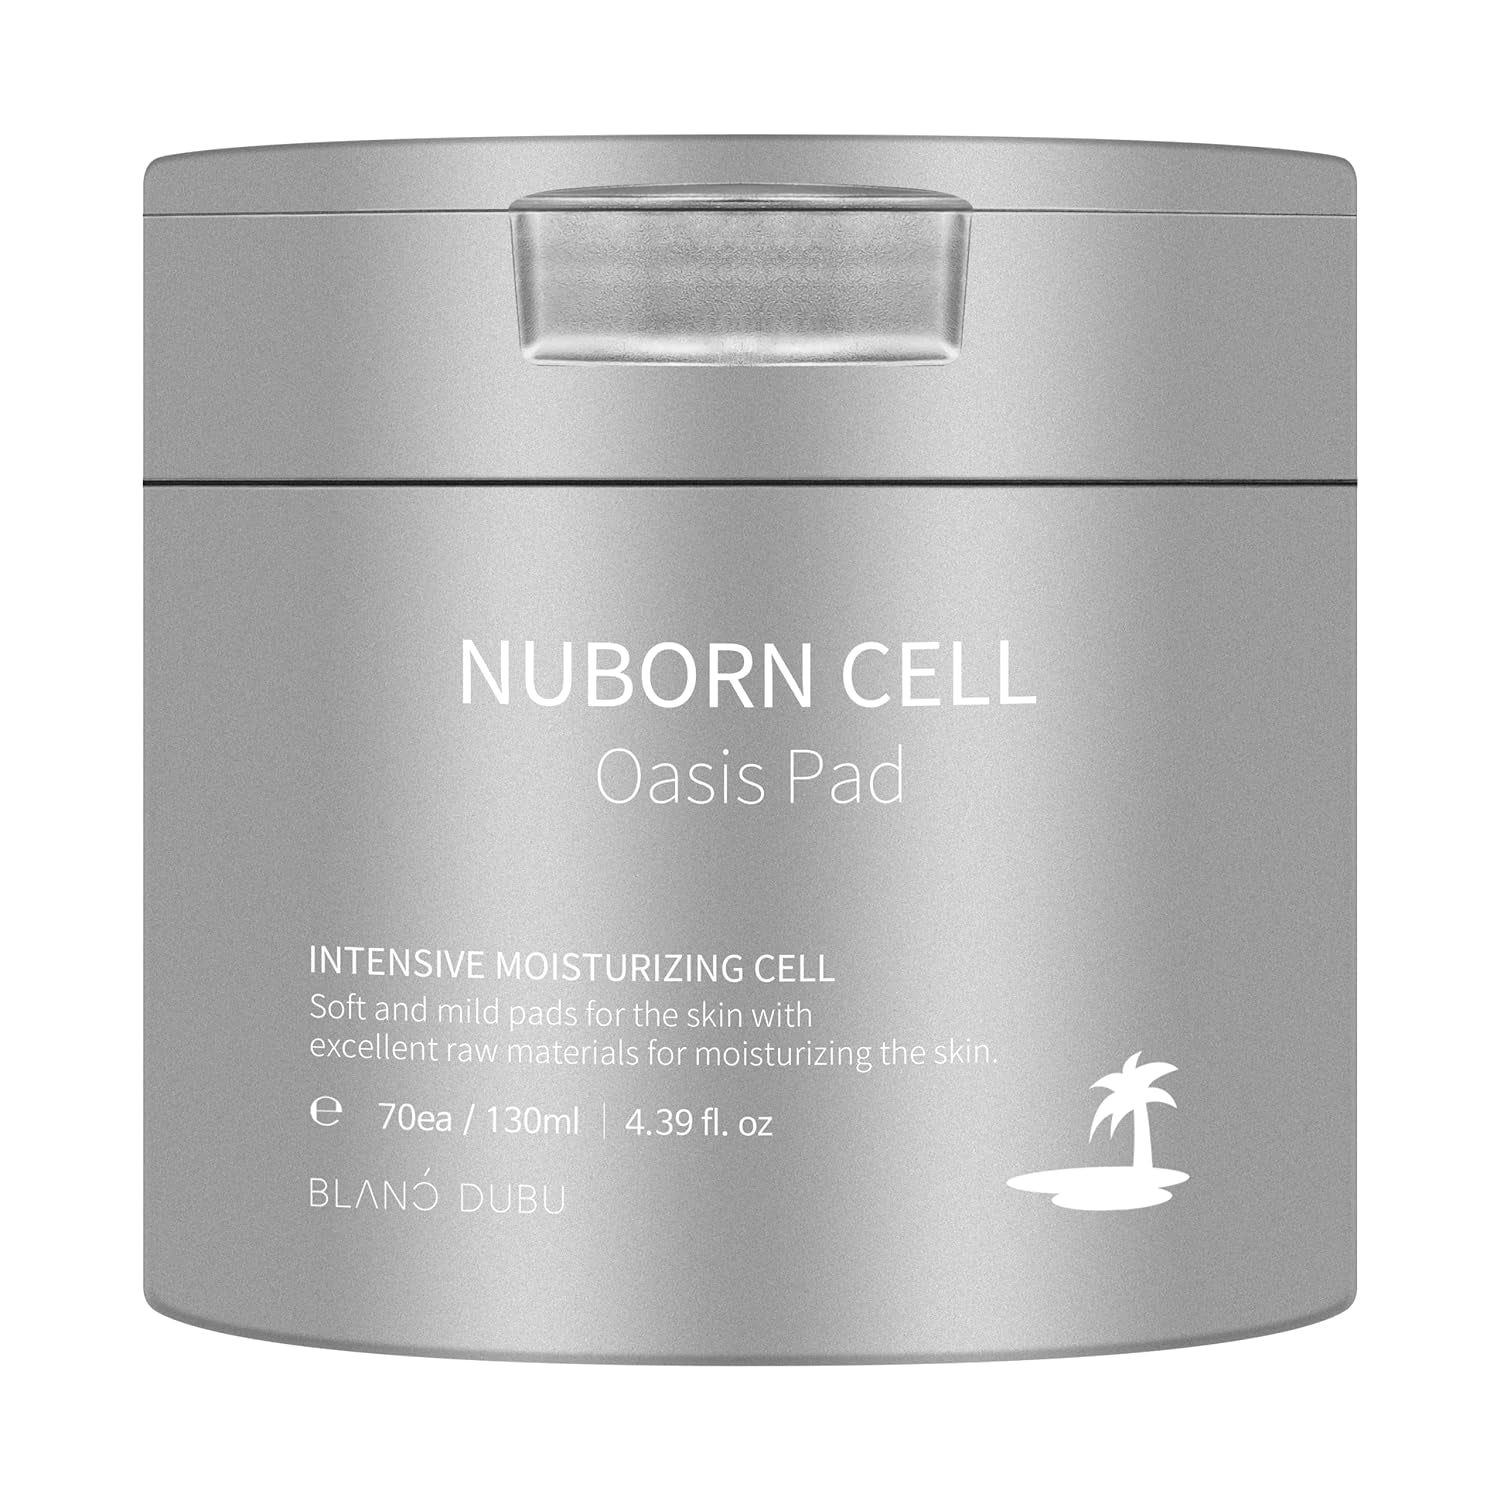 BLANC DUBU NUBORN CELL Oasis Pad, 70 Pads | Advanced Moisturizing Human Stem Cell Skincare | Tone, Hydrate, Cleanse with Gentle Phas for Sensitive Skin, Made in Korea